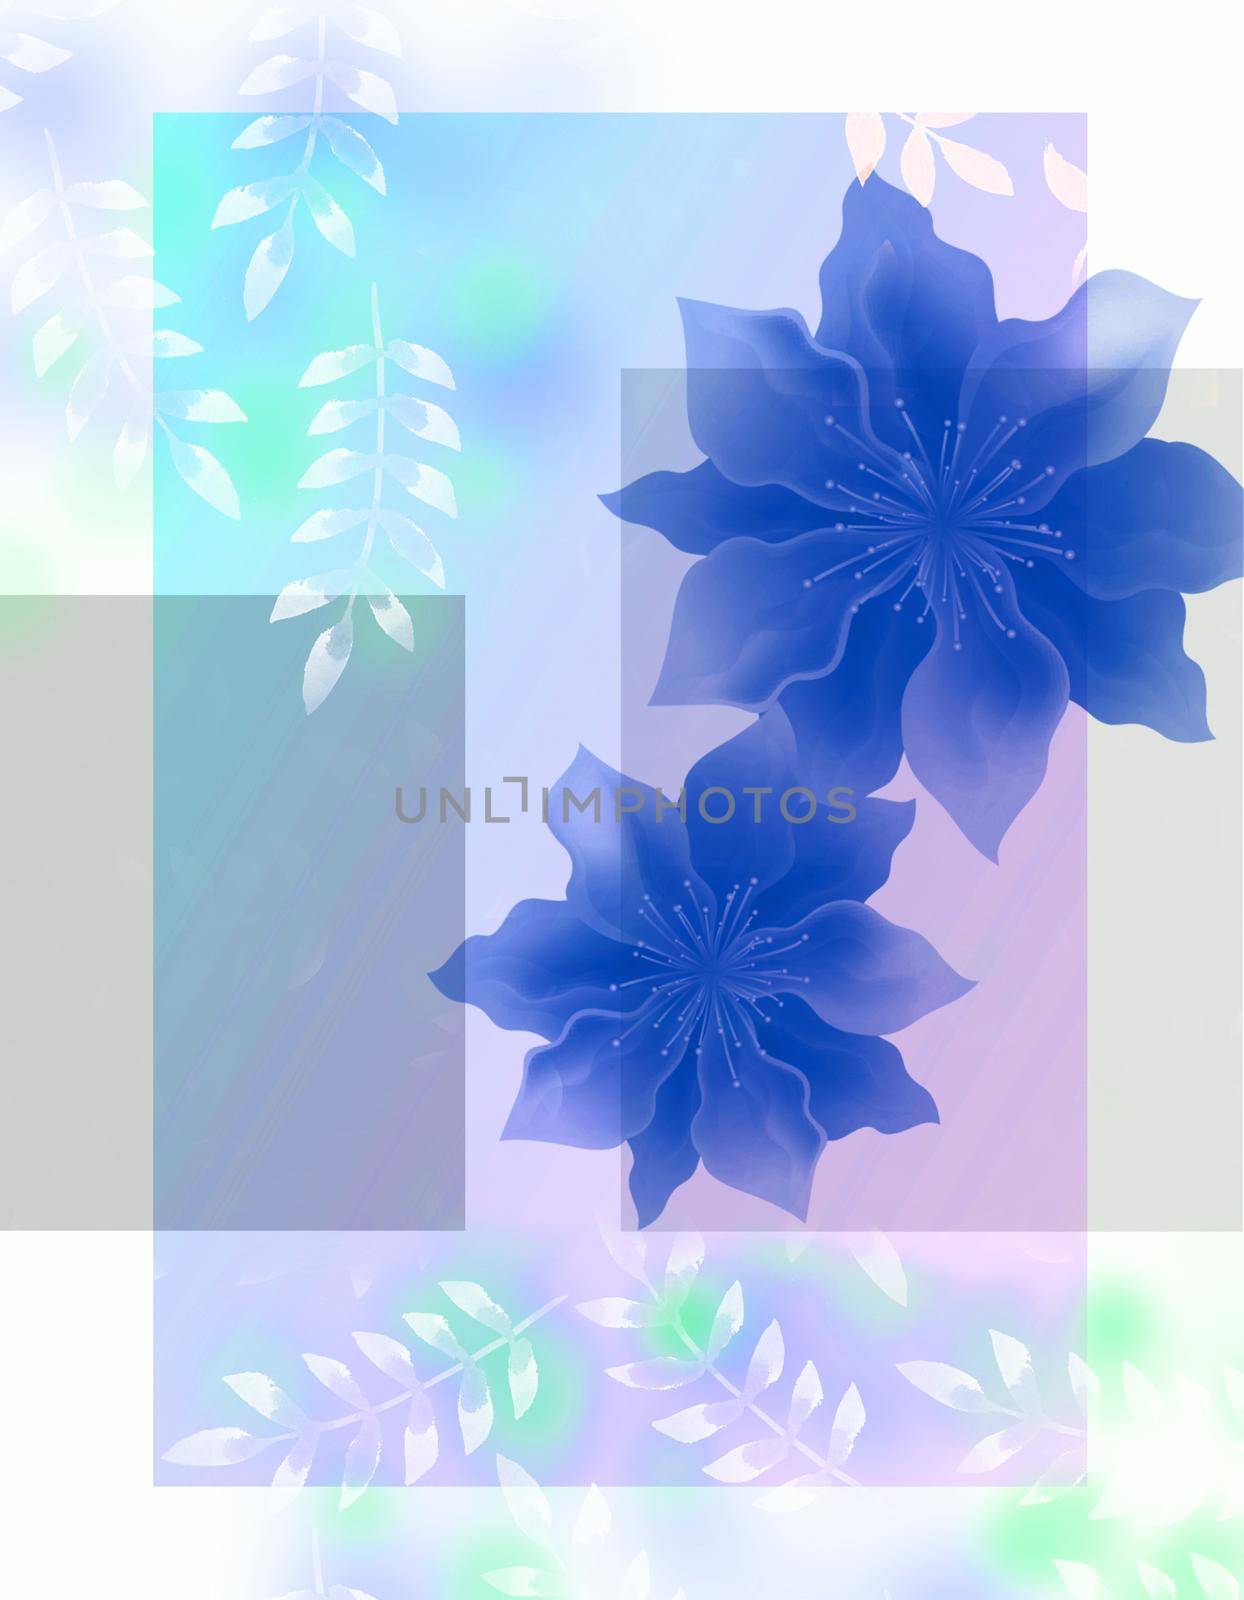 Floral set in vintage style, pastel colors, light background. A set of floral elements for your compositions.